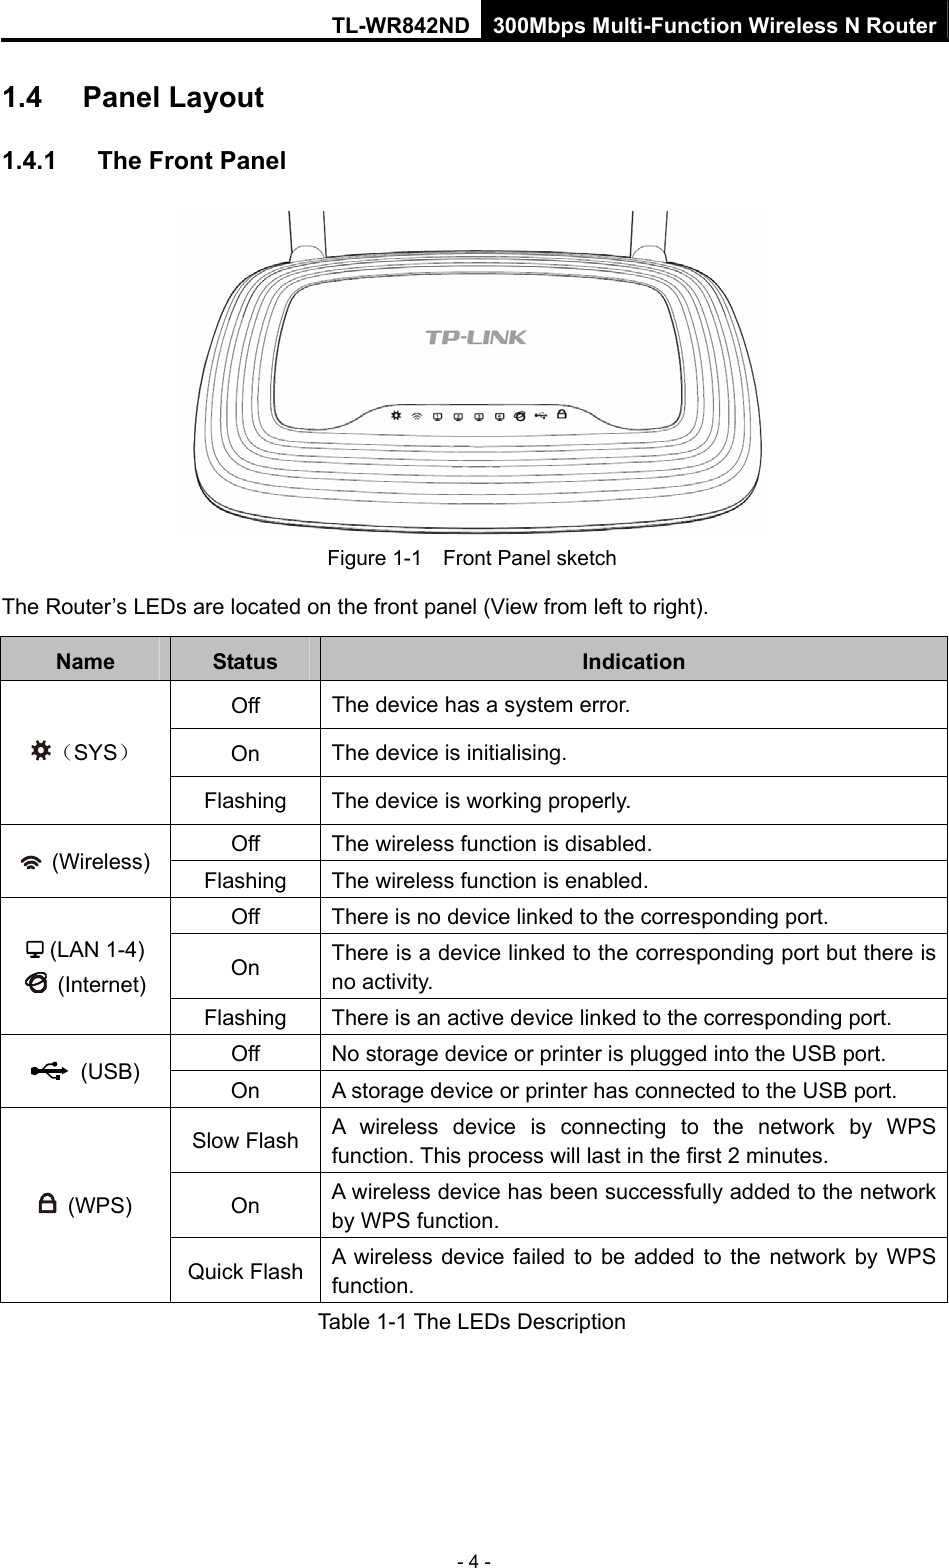 TL-WR842ND 300Mbps Multi-Function Wireless N Router - 4 - 1.4  Panel Layout 1.4.1  The Front Panel  Figure 1-1    Front Panel sketch The Router’s LEDs are located on the front panel (View from left to right).   Name  Status  Indication Off  The device has a system error. On  The device is initialising. （SYS） Flashing  The device is working properly. Off  The wireless function is disabled.  (Wireless)  Flashing  The wireless function is enabled.   Off  There is no device linked to the corresponding port. On  There is a device linked to the corresponding port but there is no activity.  (LAN 1-4)  (Internet) Flashing  There is an active device linked to the corresponding port. Off  No storage device or printer is plugged into the USB port.  (USB)  On  A storage device or printer has connected to the USB port.   Slow Flash  A wireless device is connecting to the network by WPS function. This process will last in the first 2 minutes. On  A wireless device has been successfully added to the network by WPS function.    (WPS) Quick Flash  A wireless device failed to be added to the network by WPS function. Table 1-1 The LEDs Description 